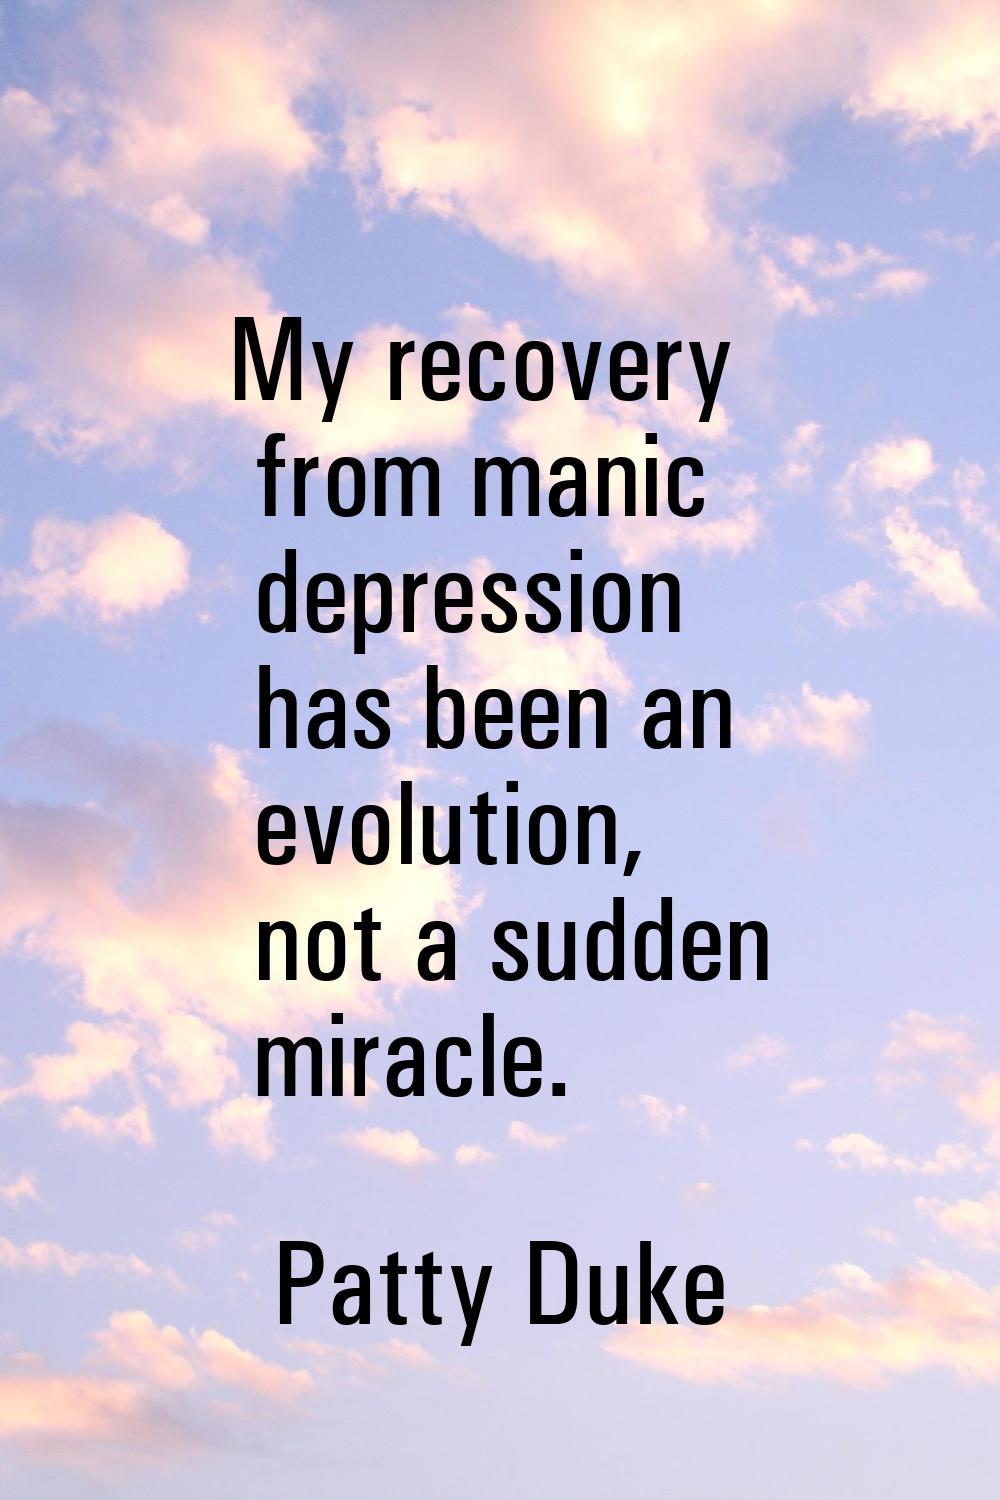 My recovery from manic depression has been an evolution, not a sudden miracle.